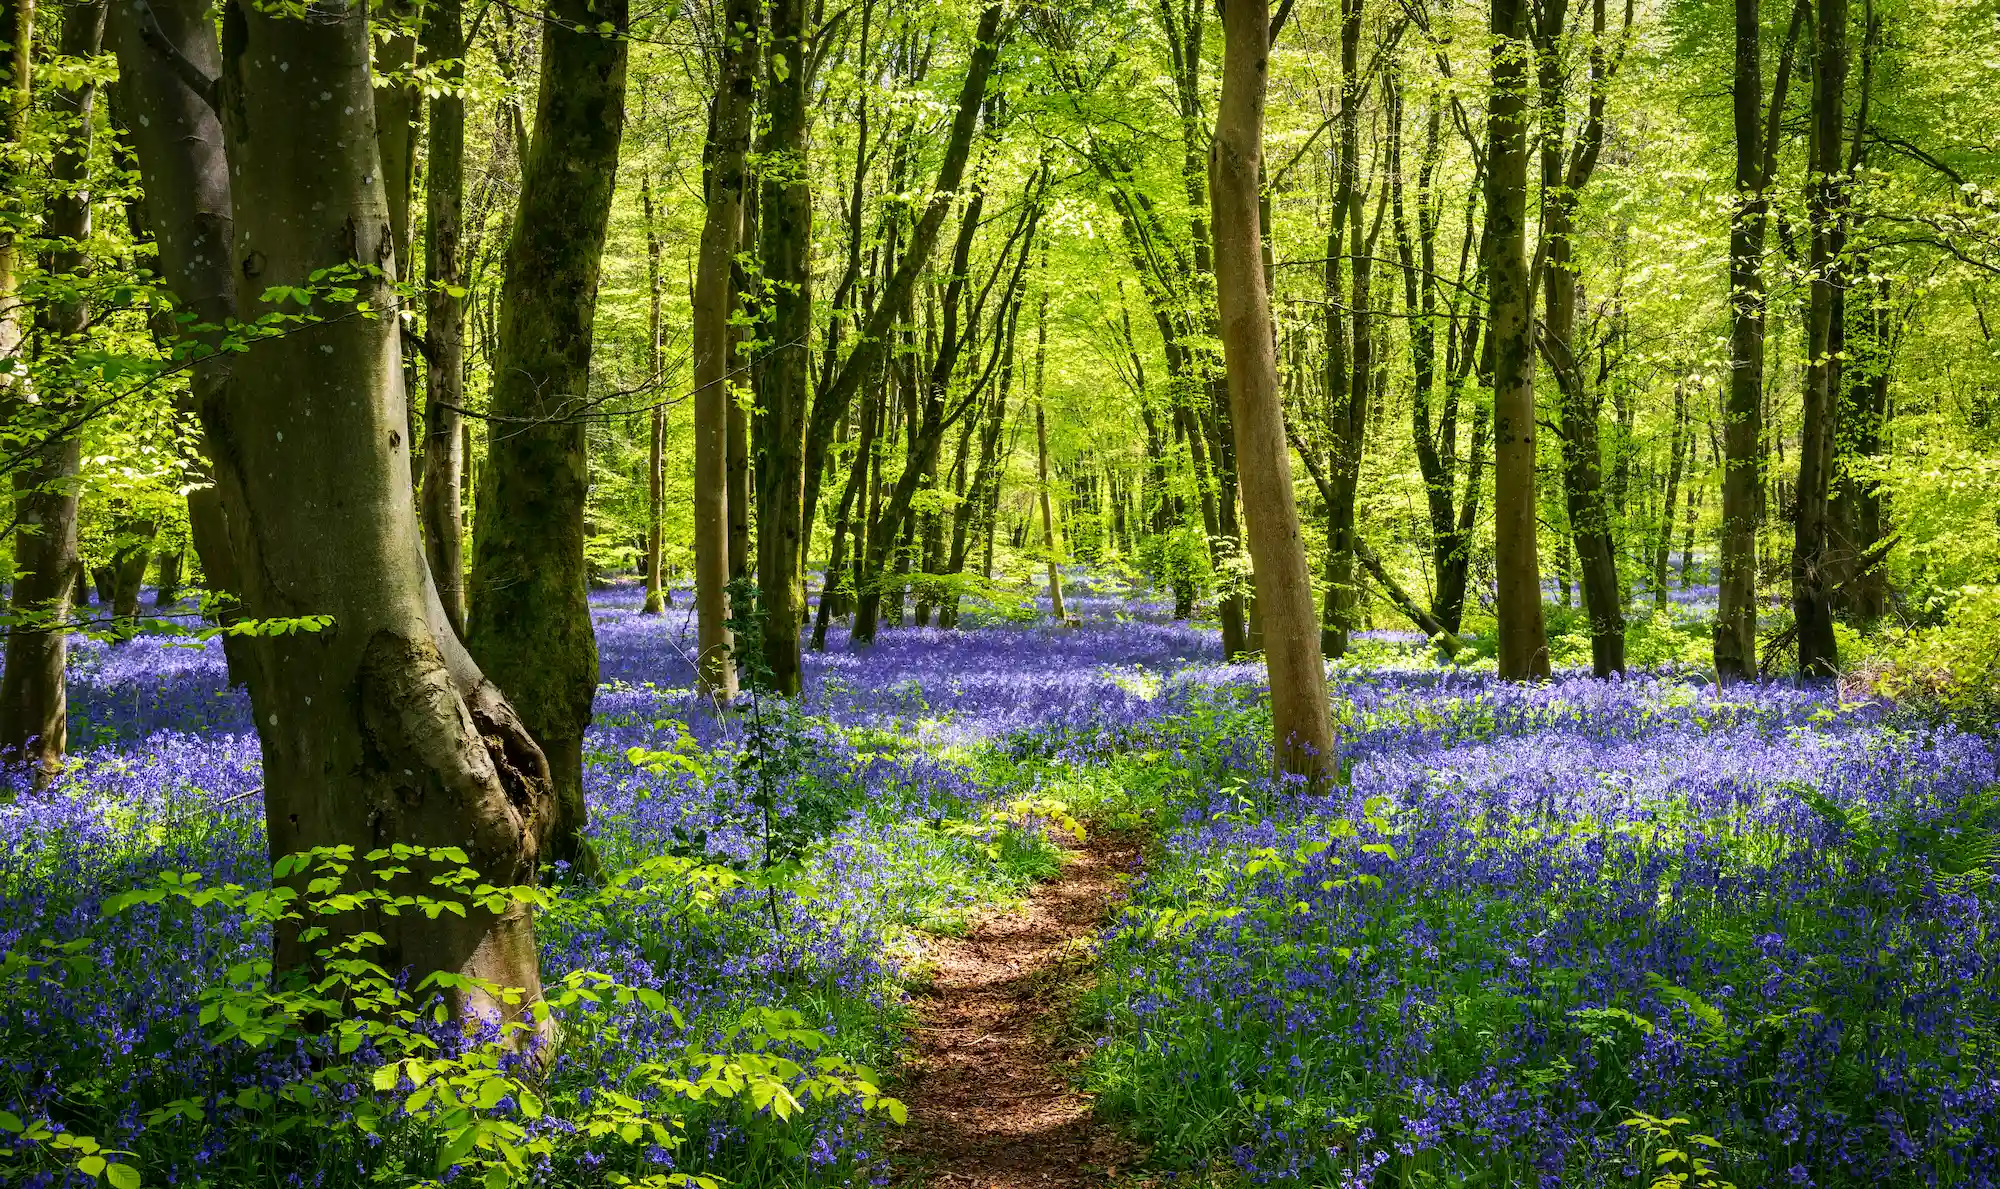 A UK woodland with bluebells surrounding the path.